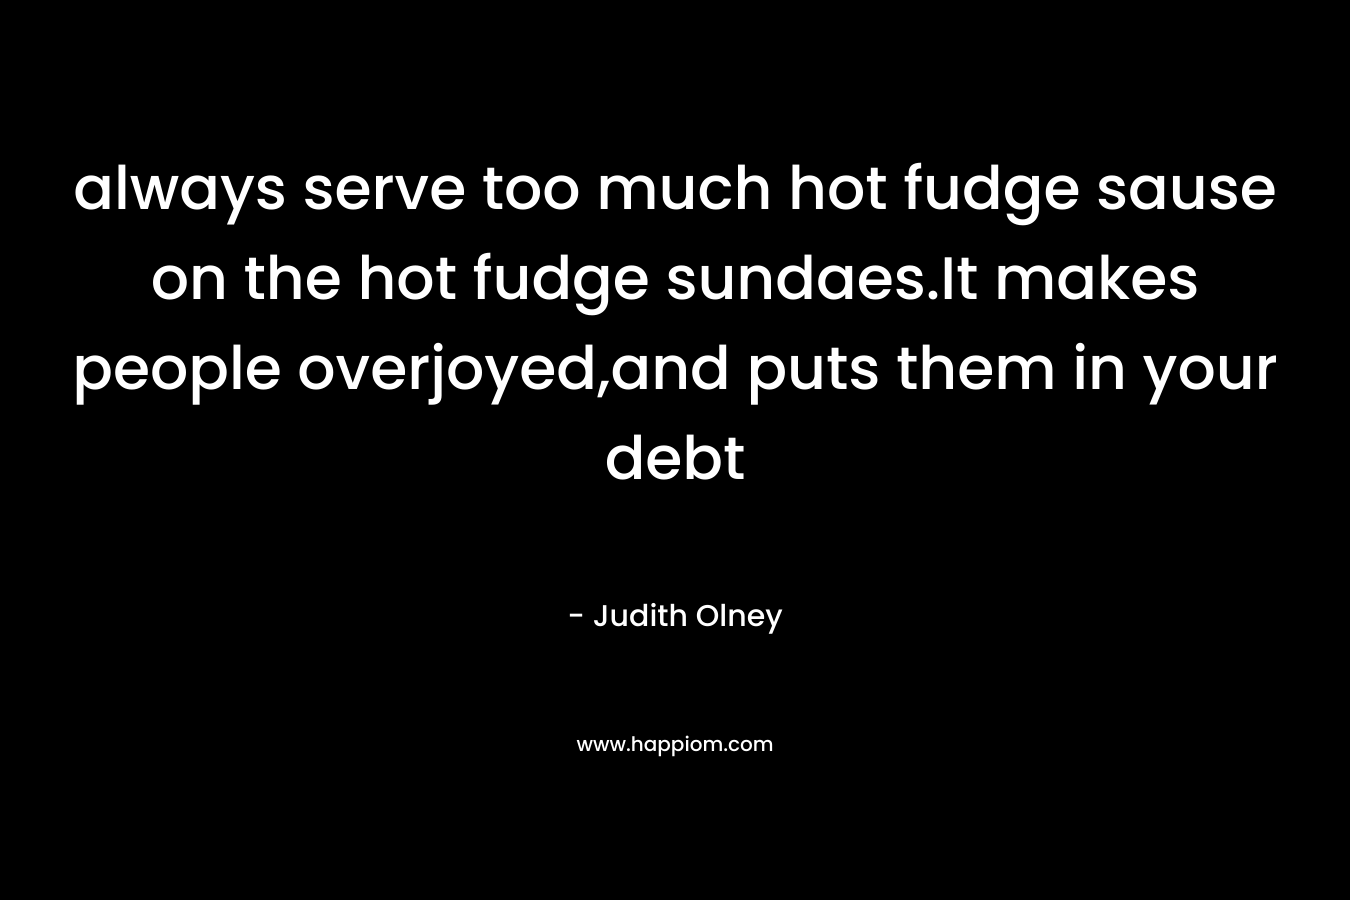 always serve too much hot fudge sause on the hot fudge sundaes.It makes people overjoyed,and puts them in your debt